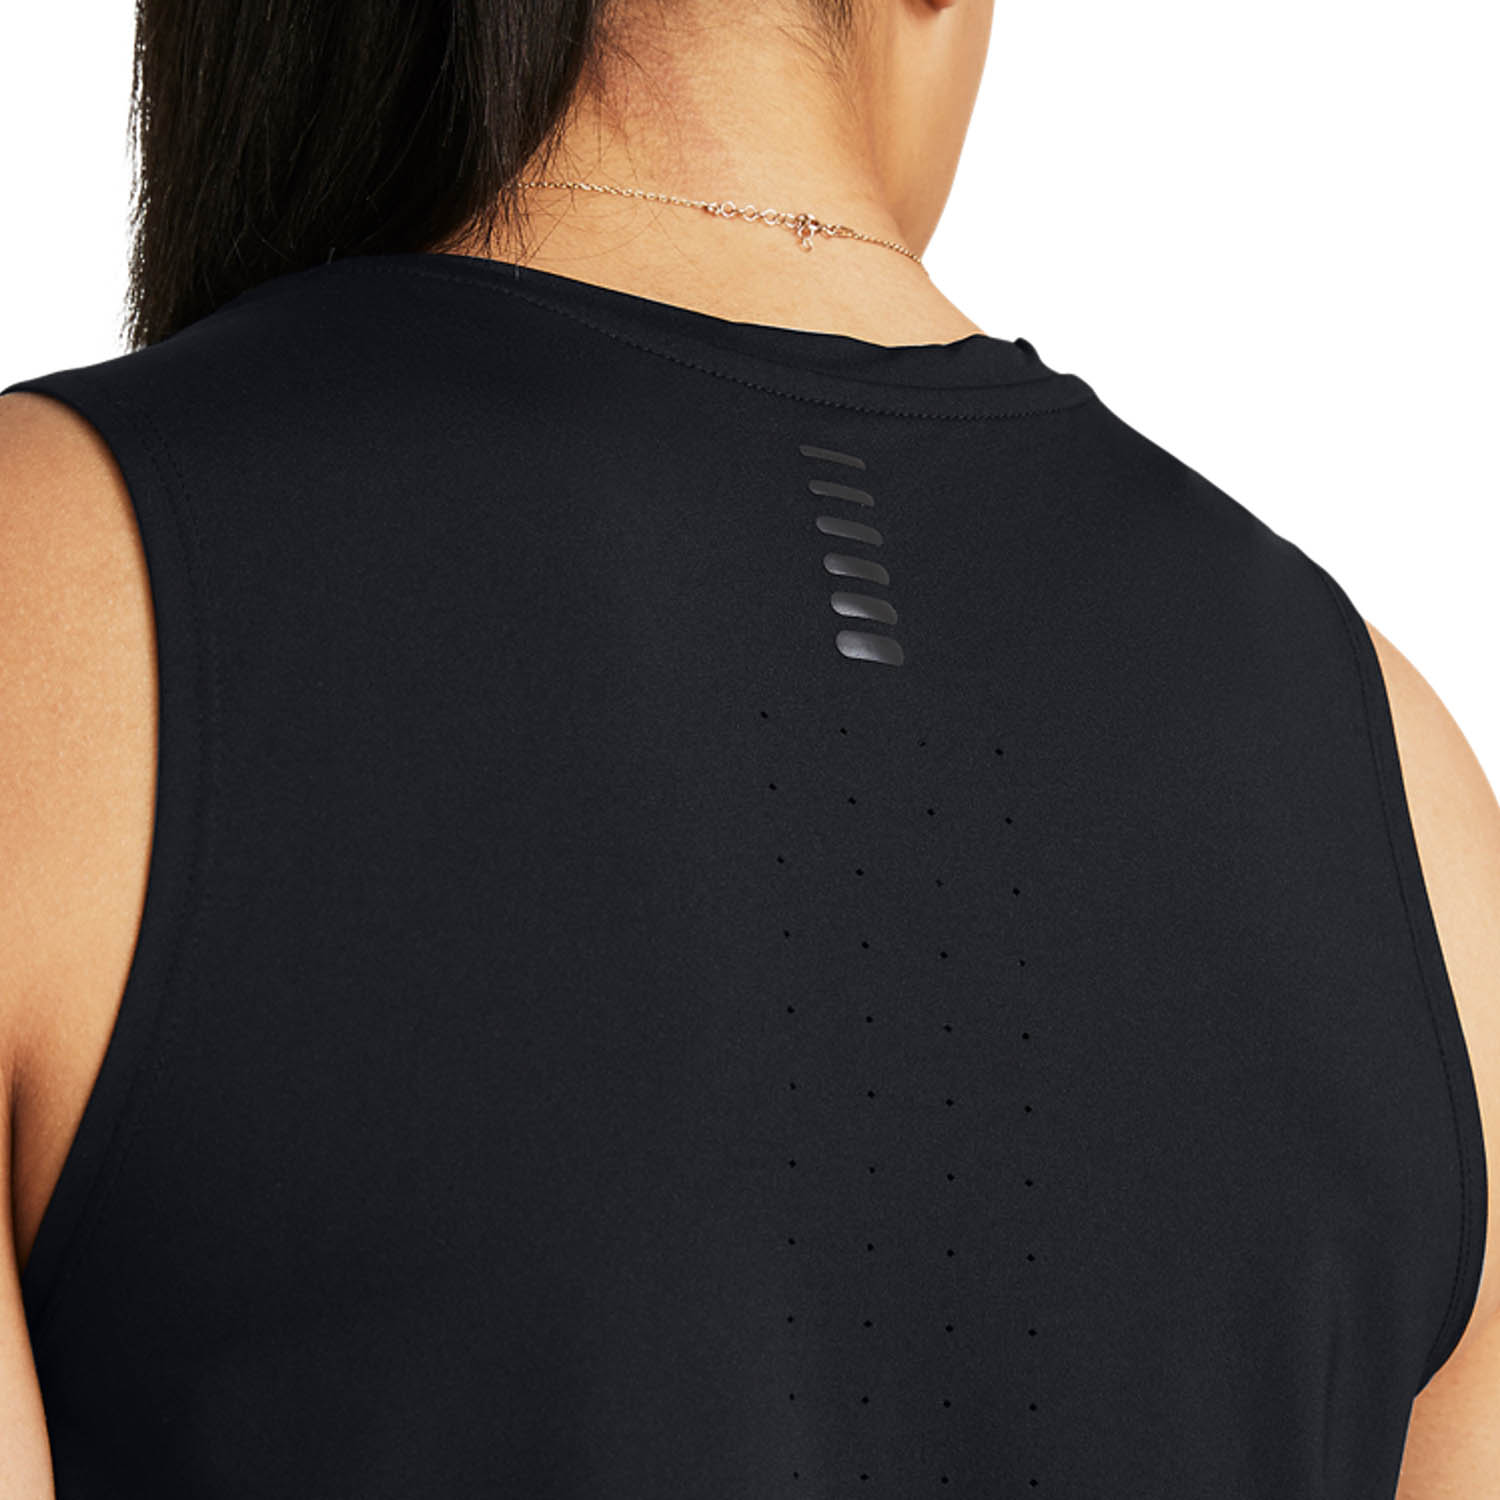 Under Armour ISO-Chill Laser Top - Black/Reflective